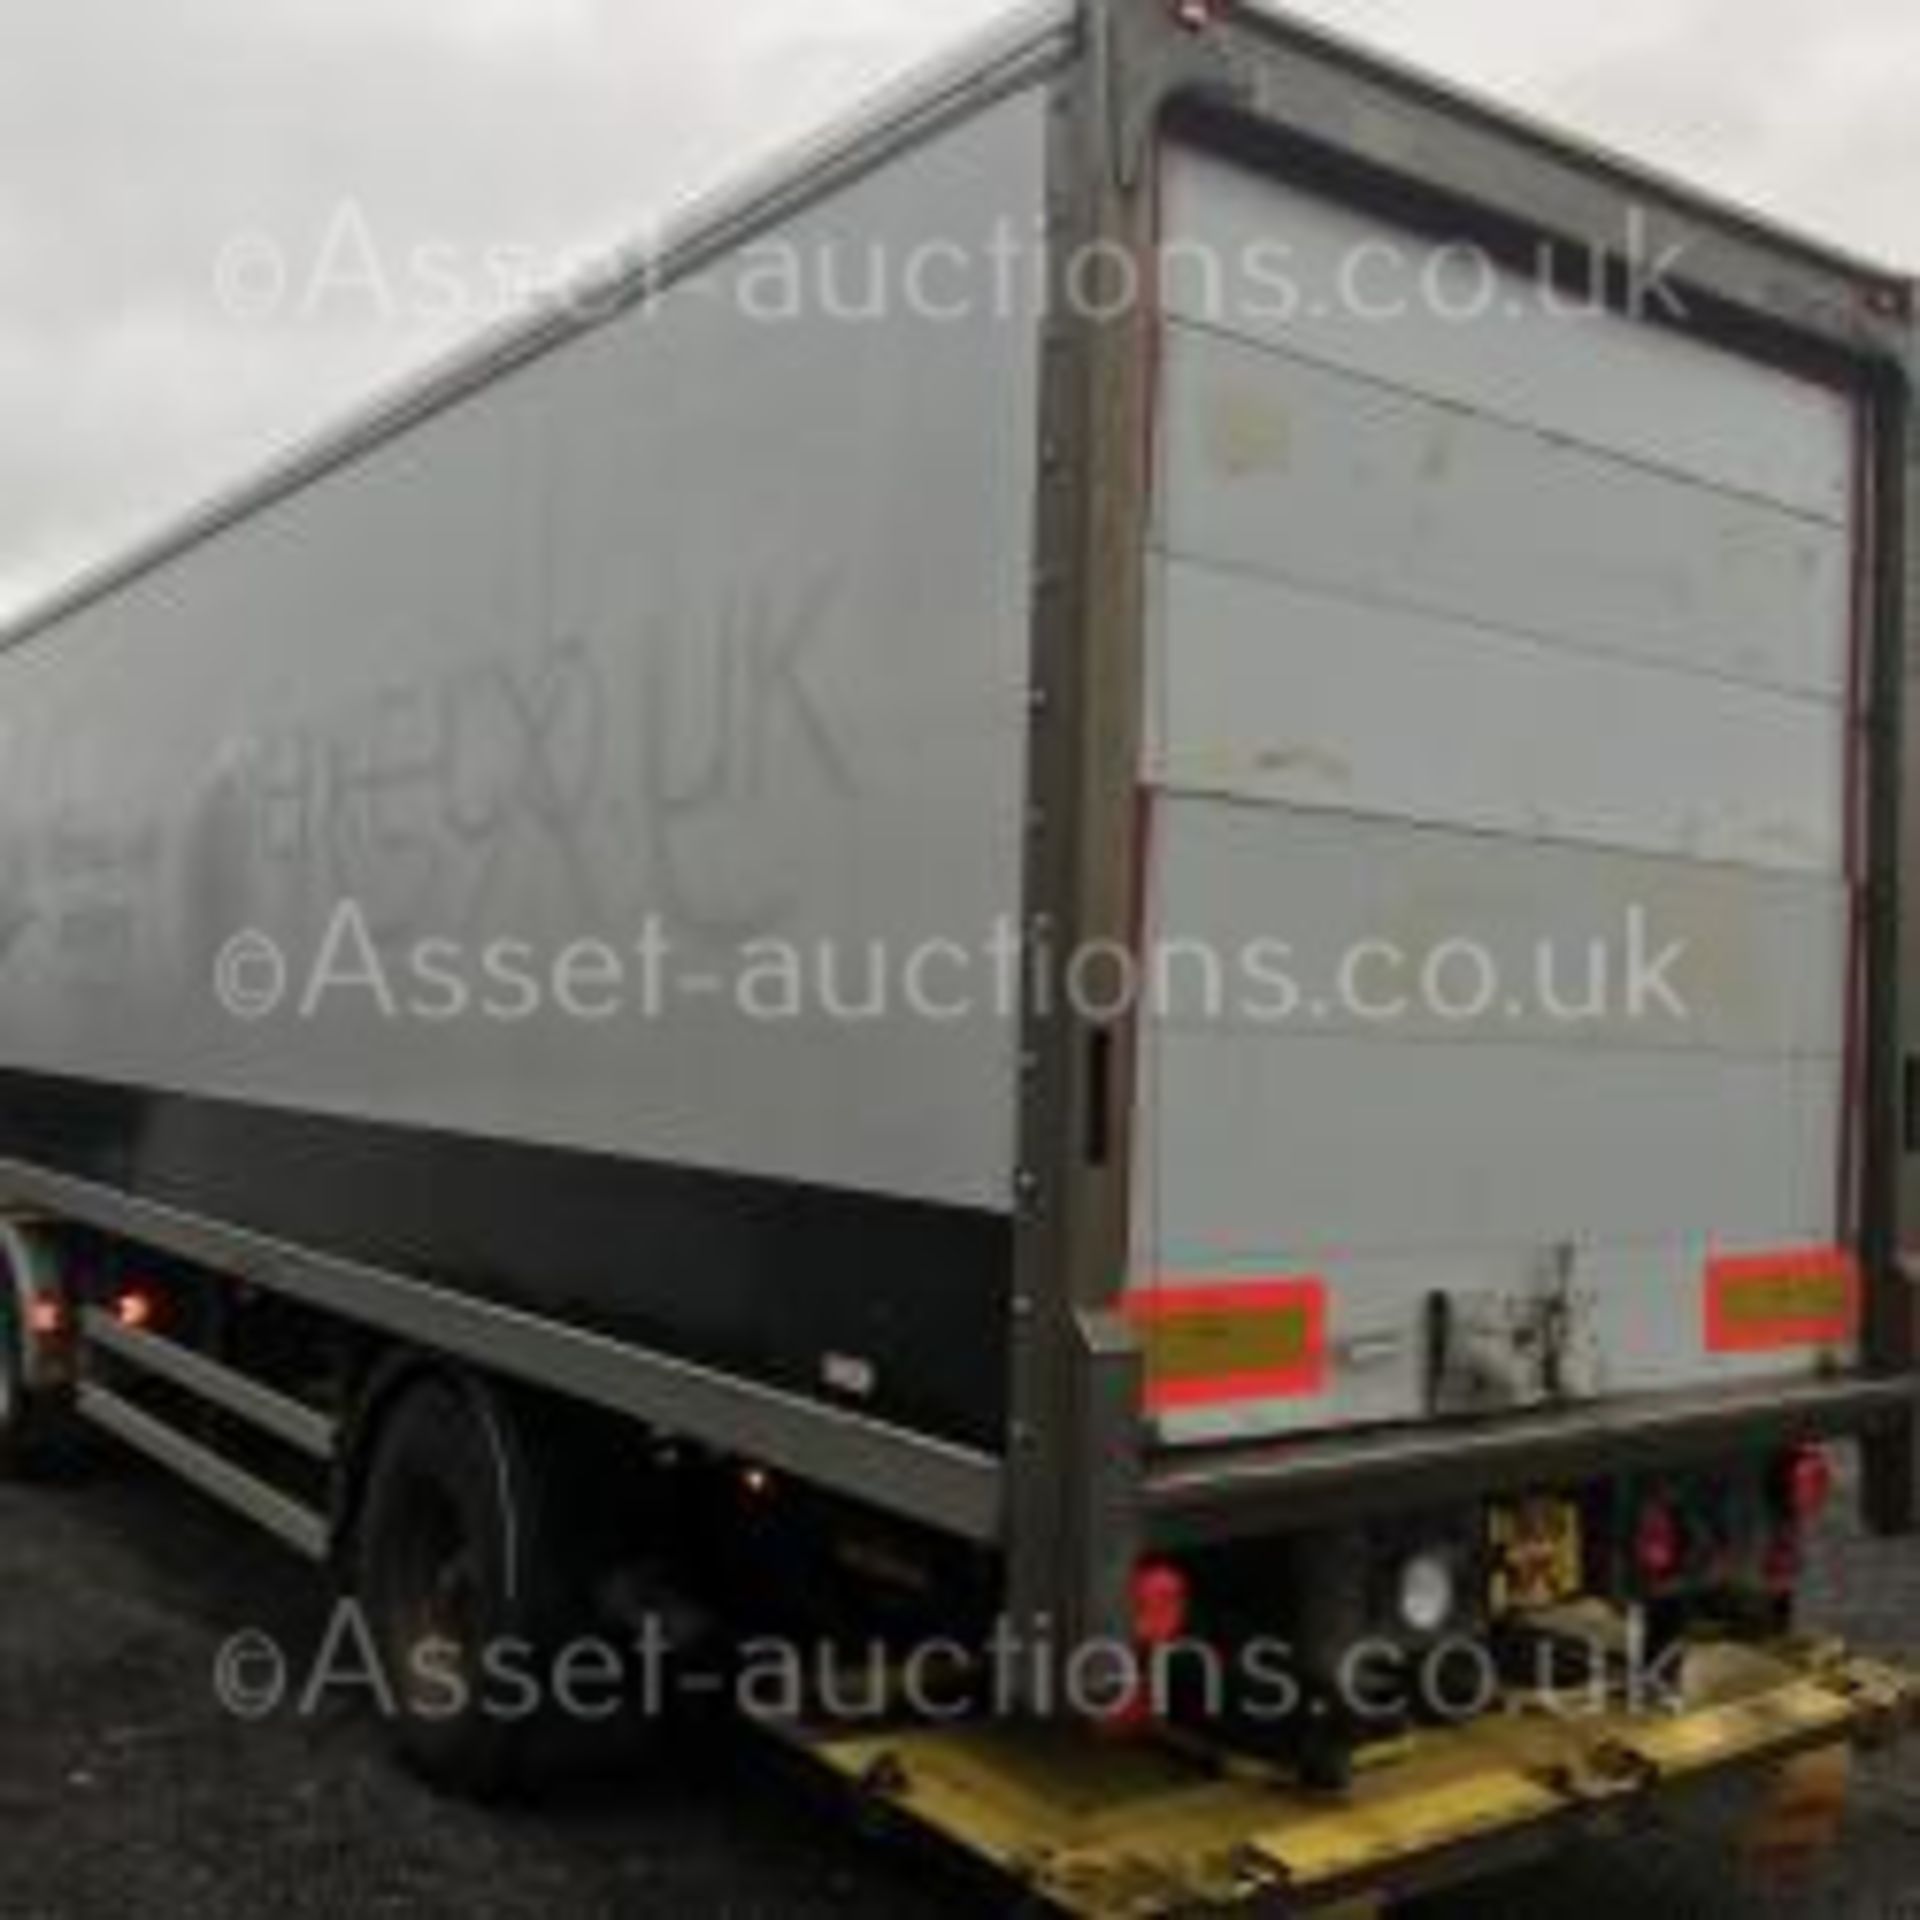 2007 DONBUR SINGLE AXLE TRAILER WITH TAIL LIFT, GOOD CONDITION *PLUS VAT* - Image 3 of 22